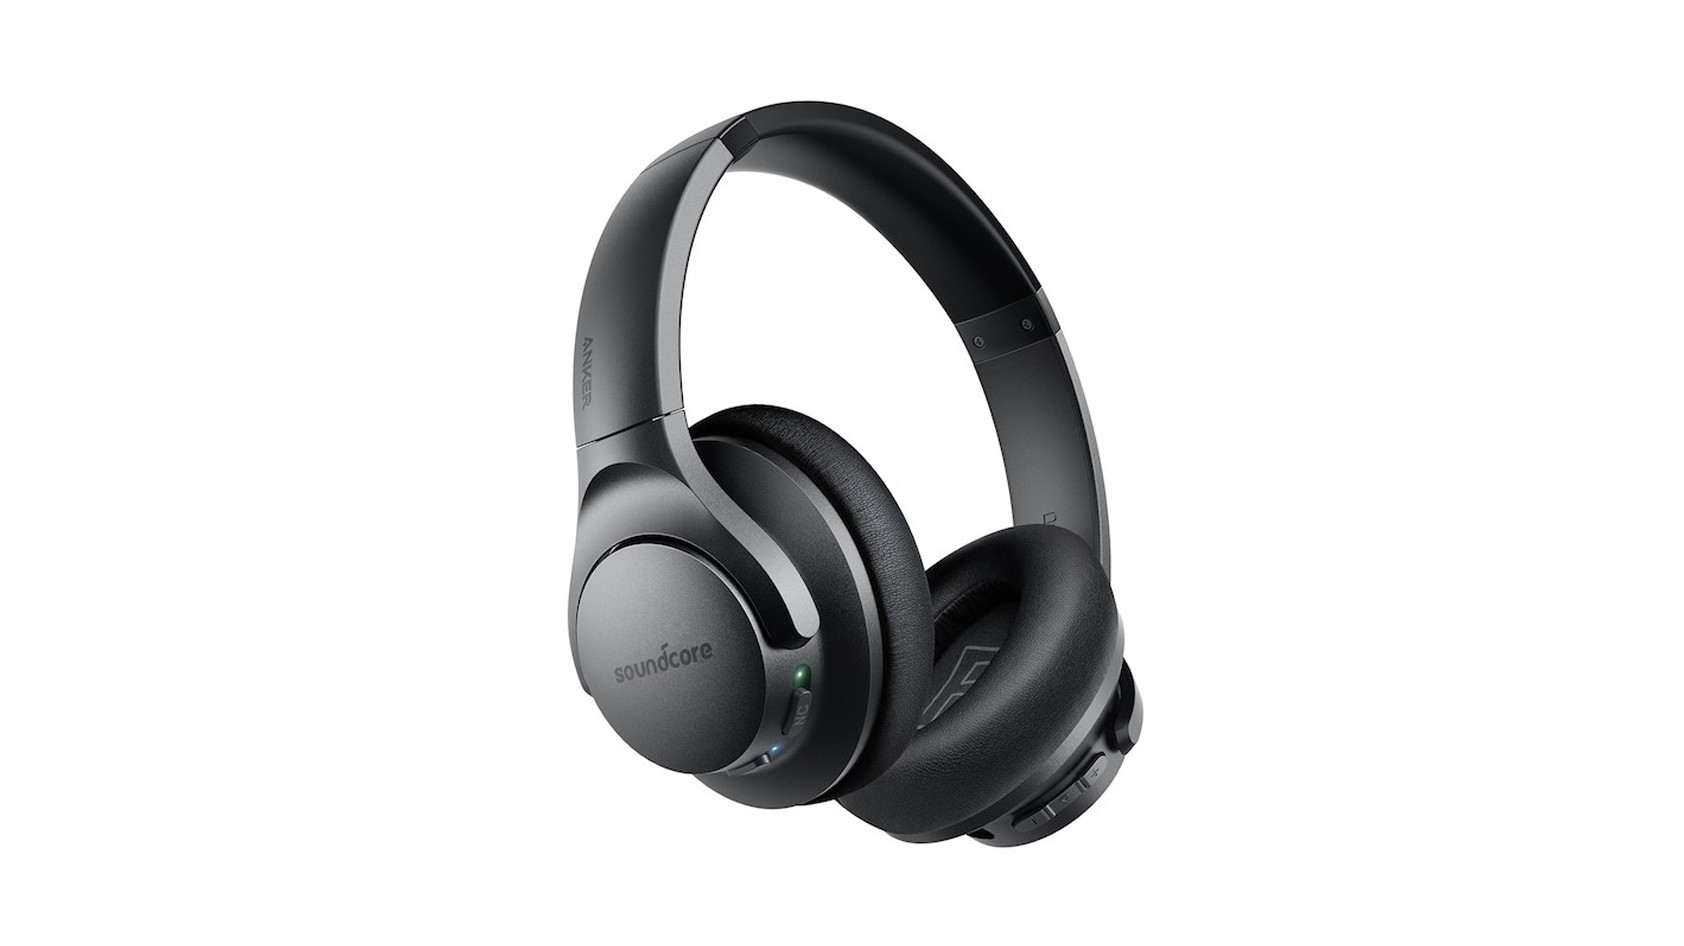 Anker Soundcore Life Q20 headphones on a white background